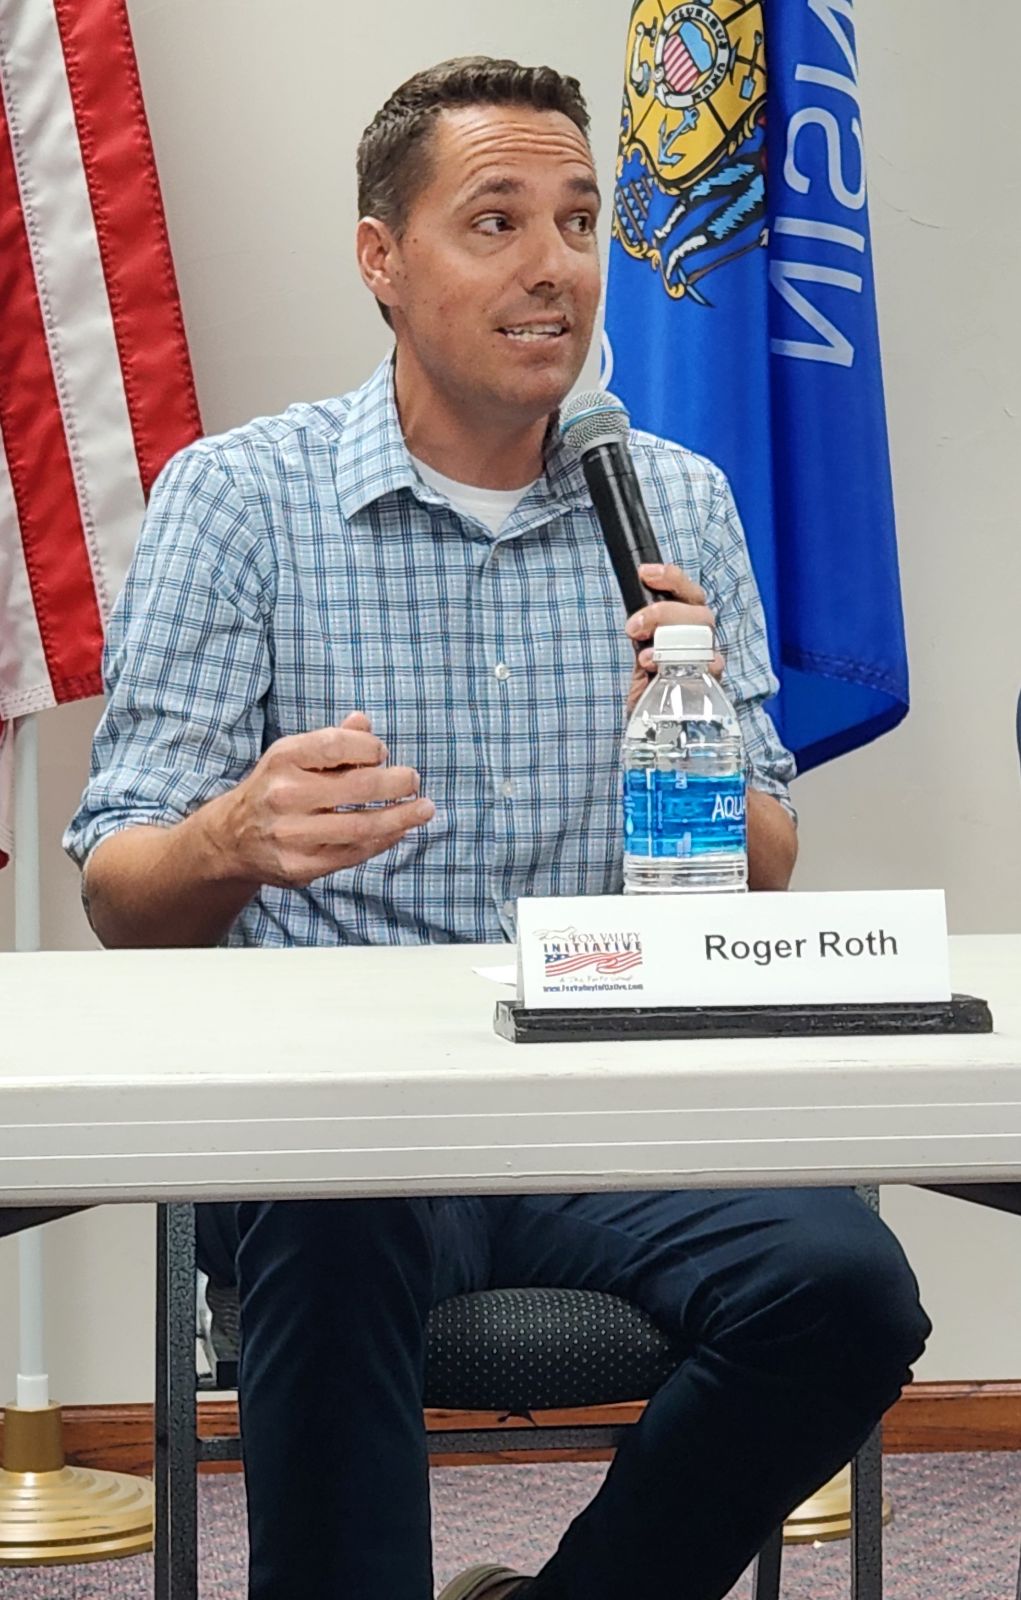 Former Wisconsin state senator Roger Roth is running for the 8th Congressional District seat abandoned by Mike Gallagher.